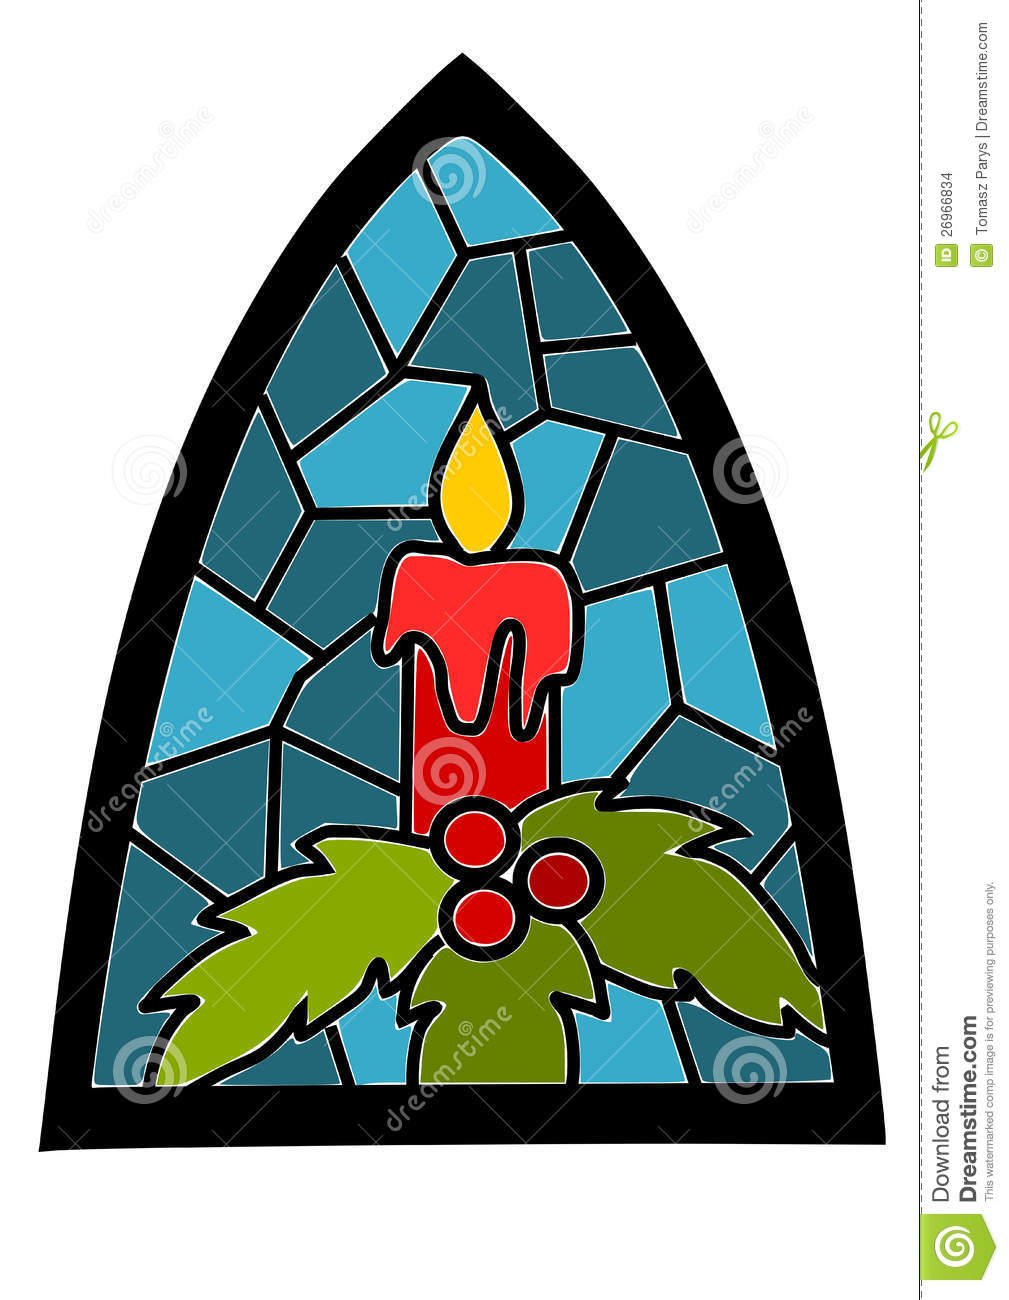 Candle On Blue Stained Glass Window Stock Images   Image  26966834